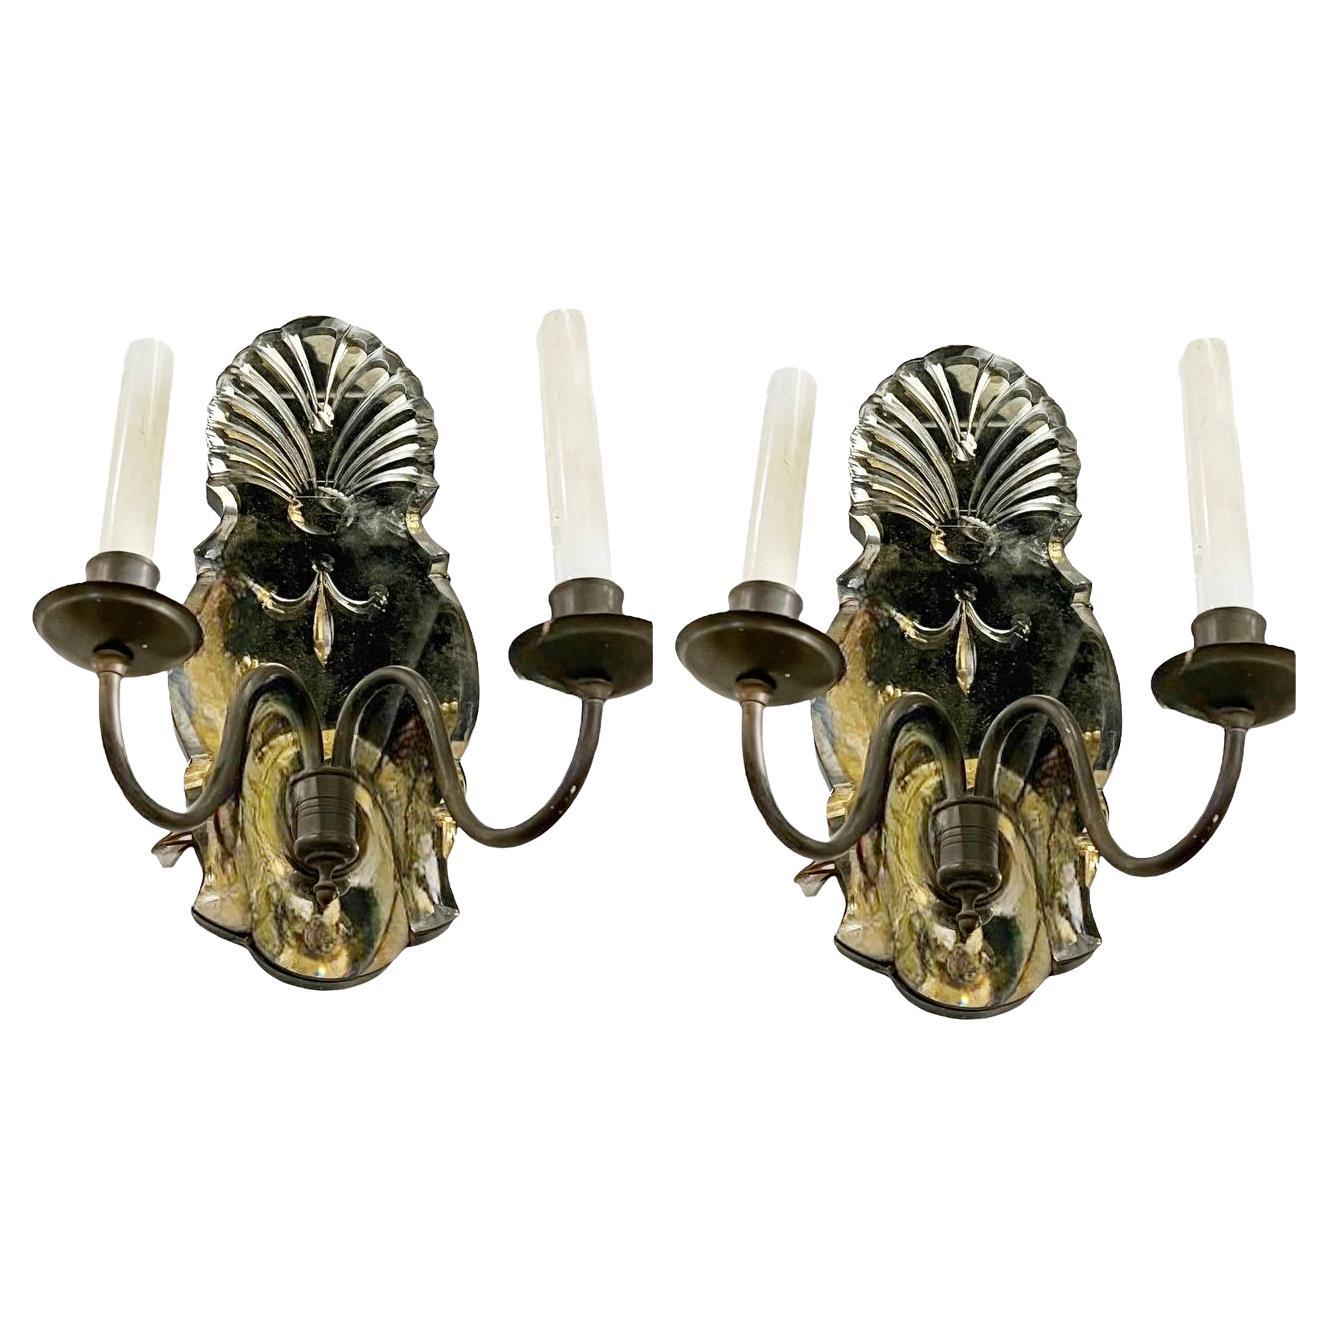 1920's Caldwell Etched Mirror Sconces with Brown Patina